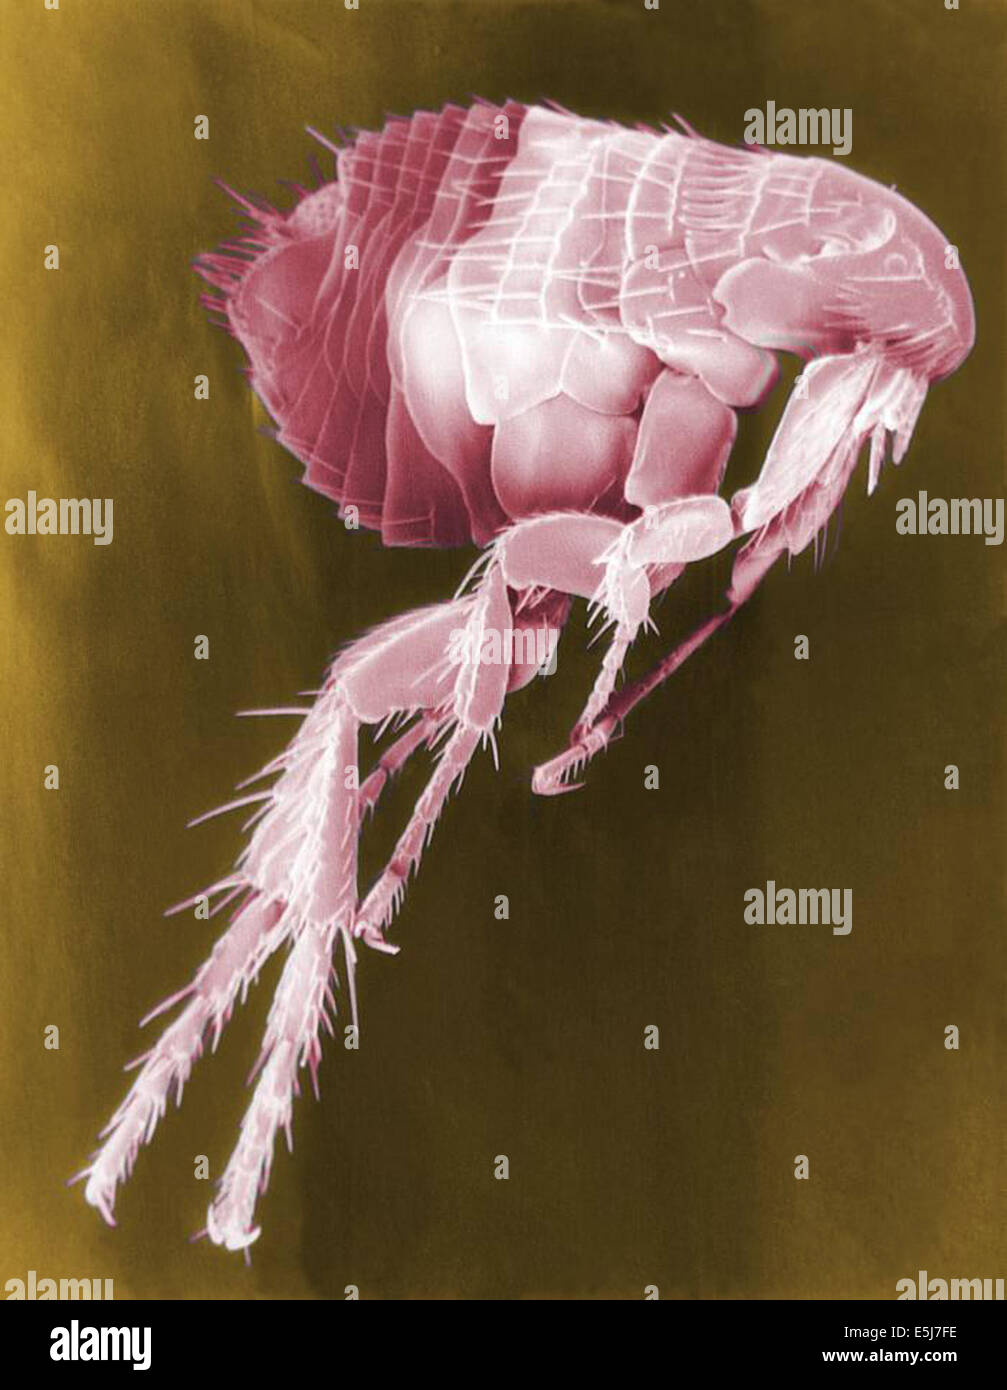 Fleas are known to carry a number of diseases that are transferable to human beings through their bites. Included in these infections is the plague, caused by the bacterium Yersinia pestis. From the archives of Press Portrait Service - image created by Janice Haney Carr. Plague (Bubonic, Pneumonic, Septicemic) Stock Photo